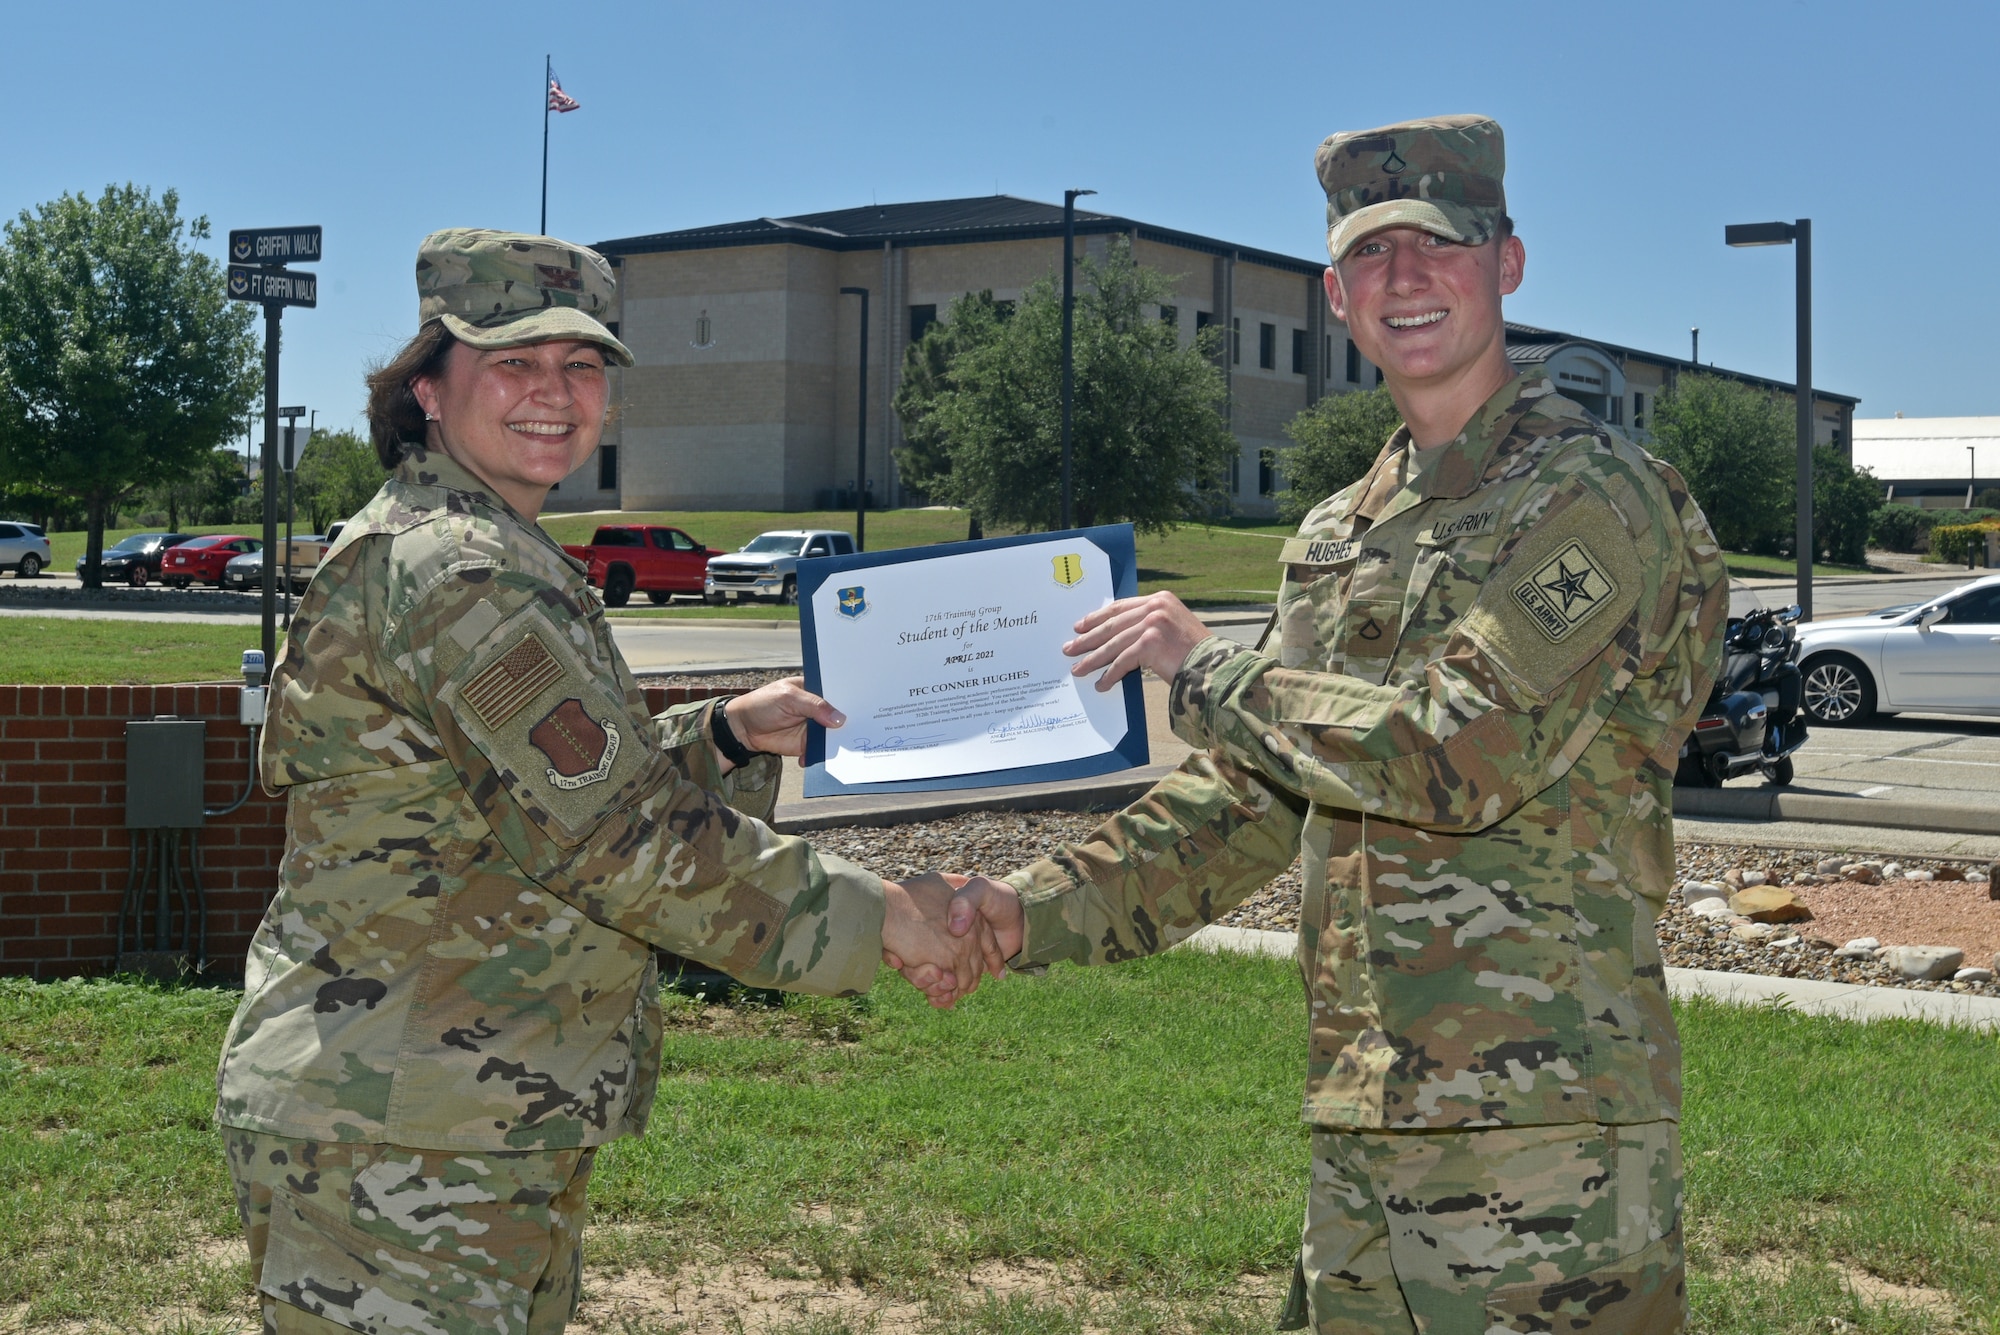 U.S. Air Force Col. Angelina Maguinness, 17th Training Group commander, presents U.S. Army Pfc. Conner Hughes, 312th Training Squadron student, the 17th TRG Student of the Month award for April 2021, outside of the Brandenburg Hall on Goodfellow Air Force Base, Texas, May 21, 2021. The 312th TRS’s mission is to train, develop, and inspire warriors to deliver fire emergency services and nuclear treaty monitoring for the Department of Defense and our international partners. (U.S. Air Force photo by Senior Airman Ashley Thrash)